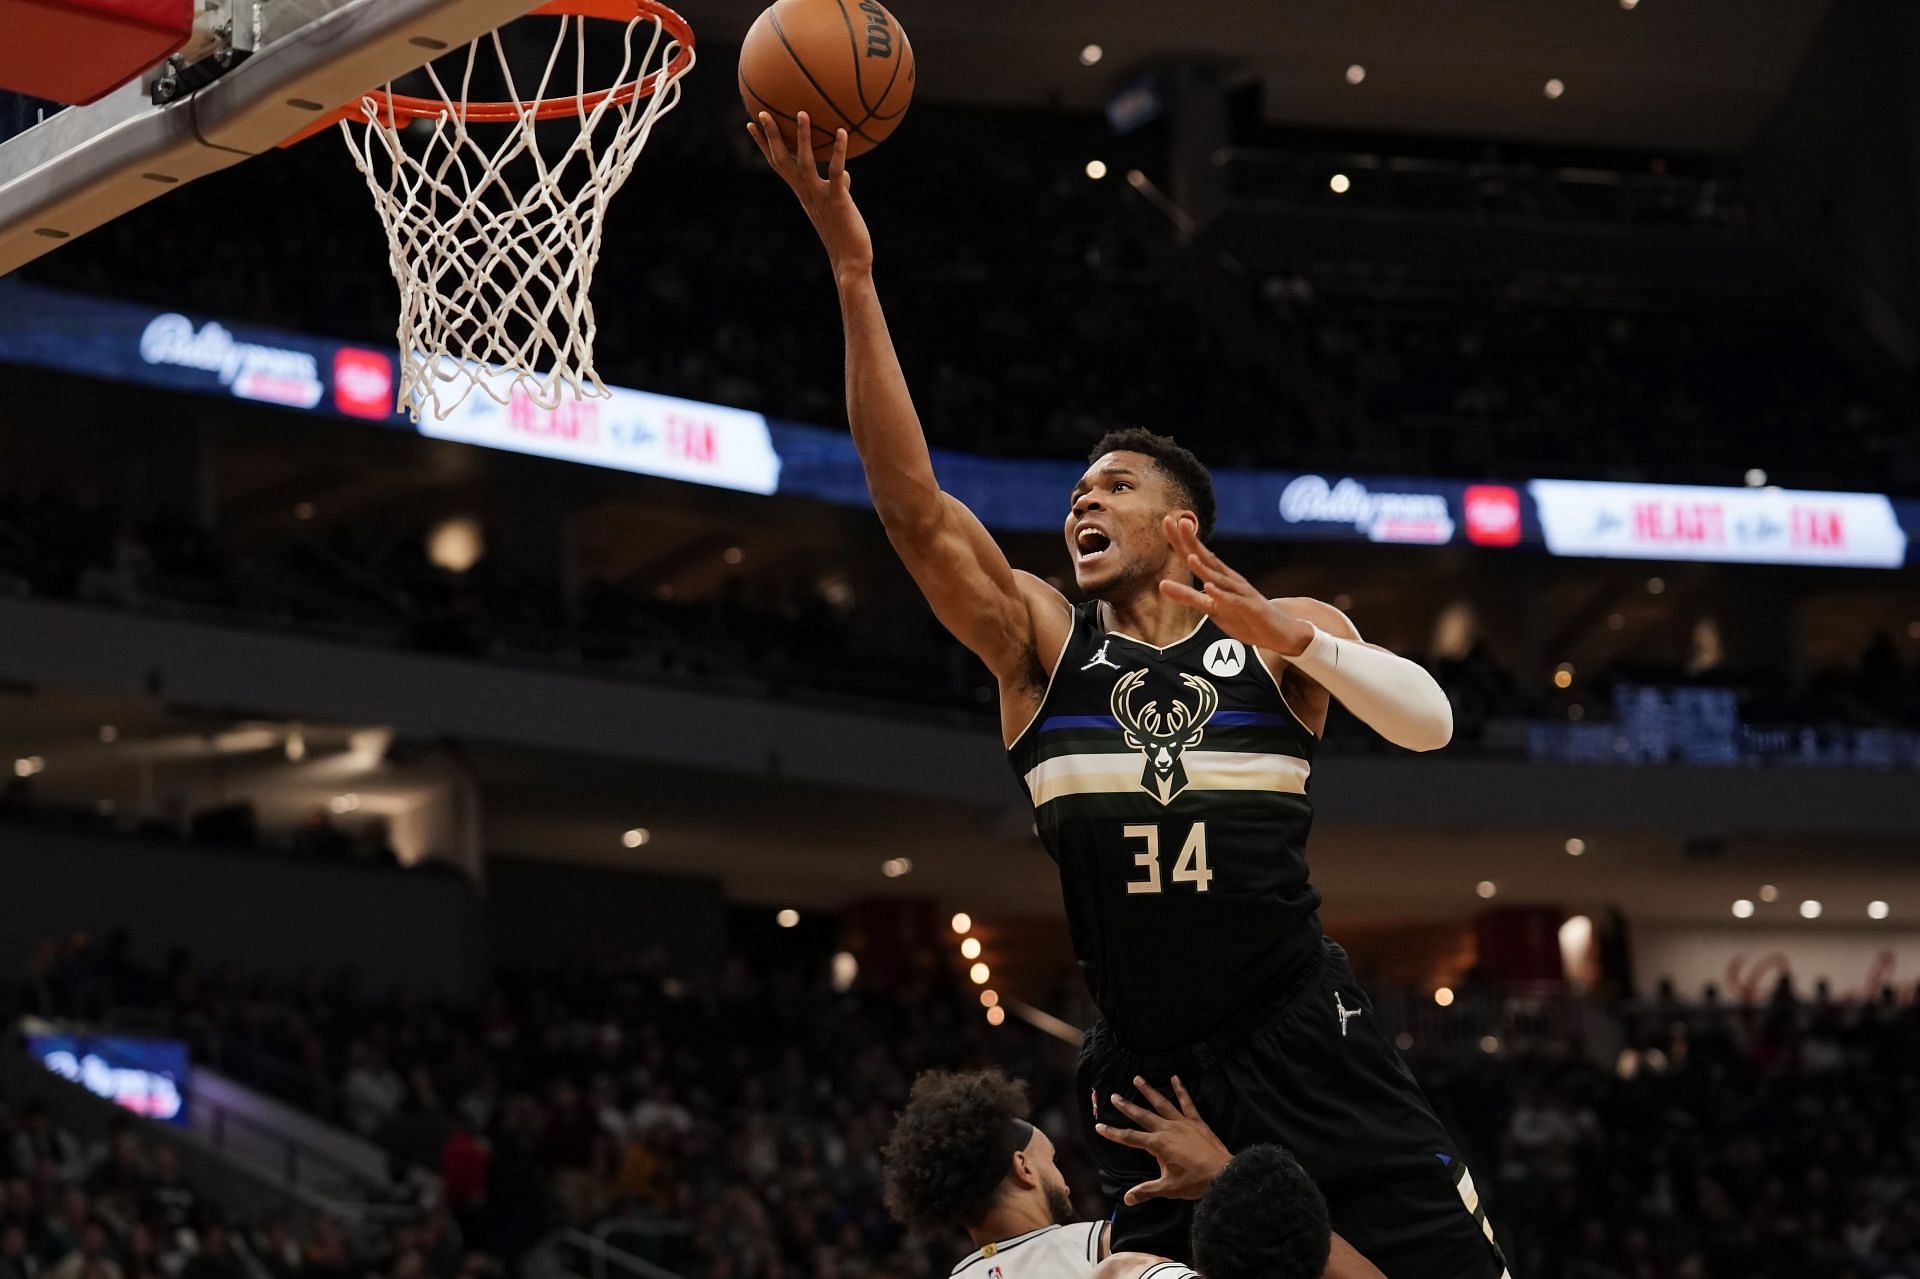 Giannis Antetokounmpo has a 7-foot-3inch wingspan